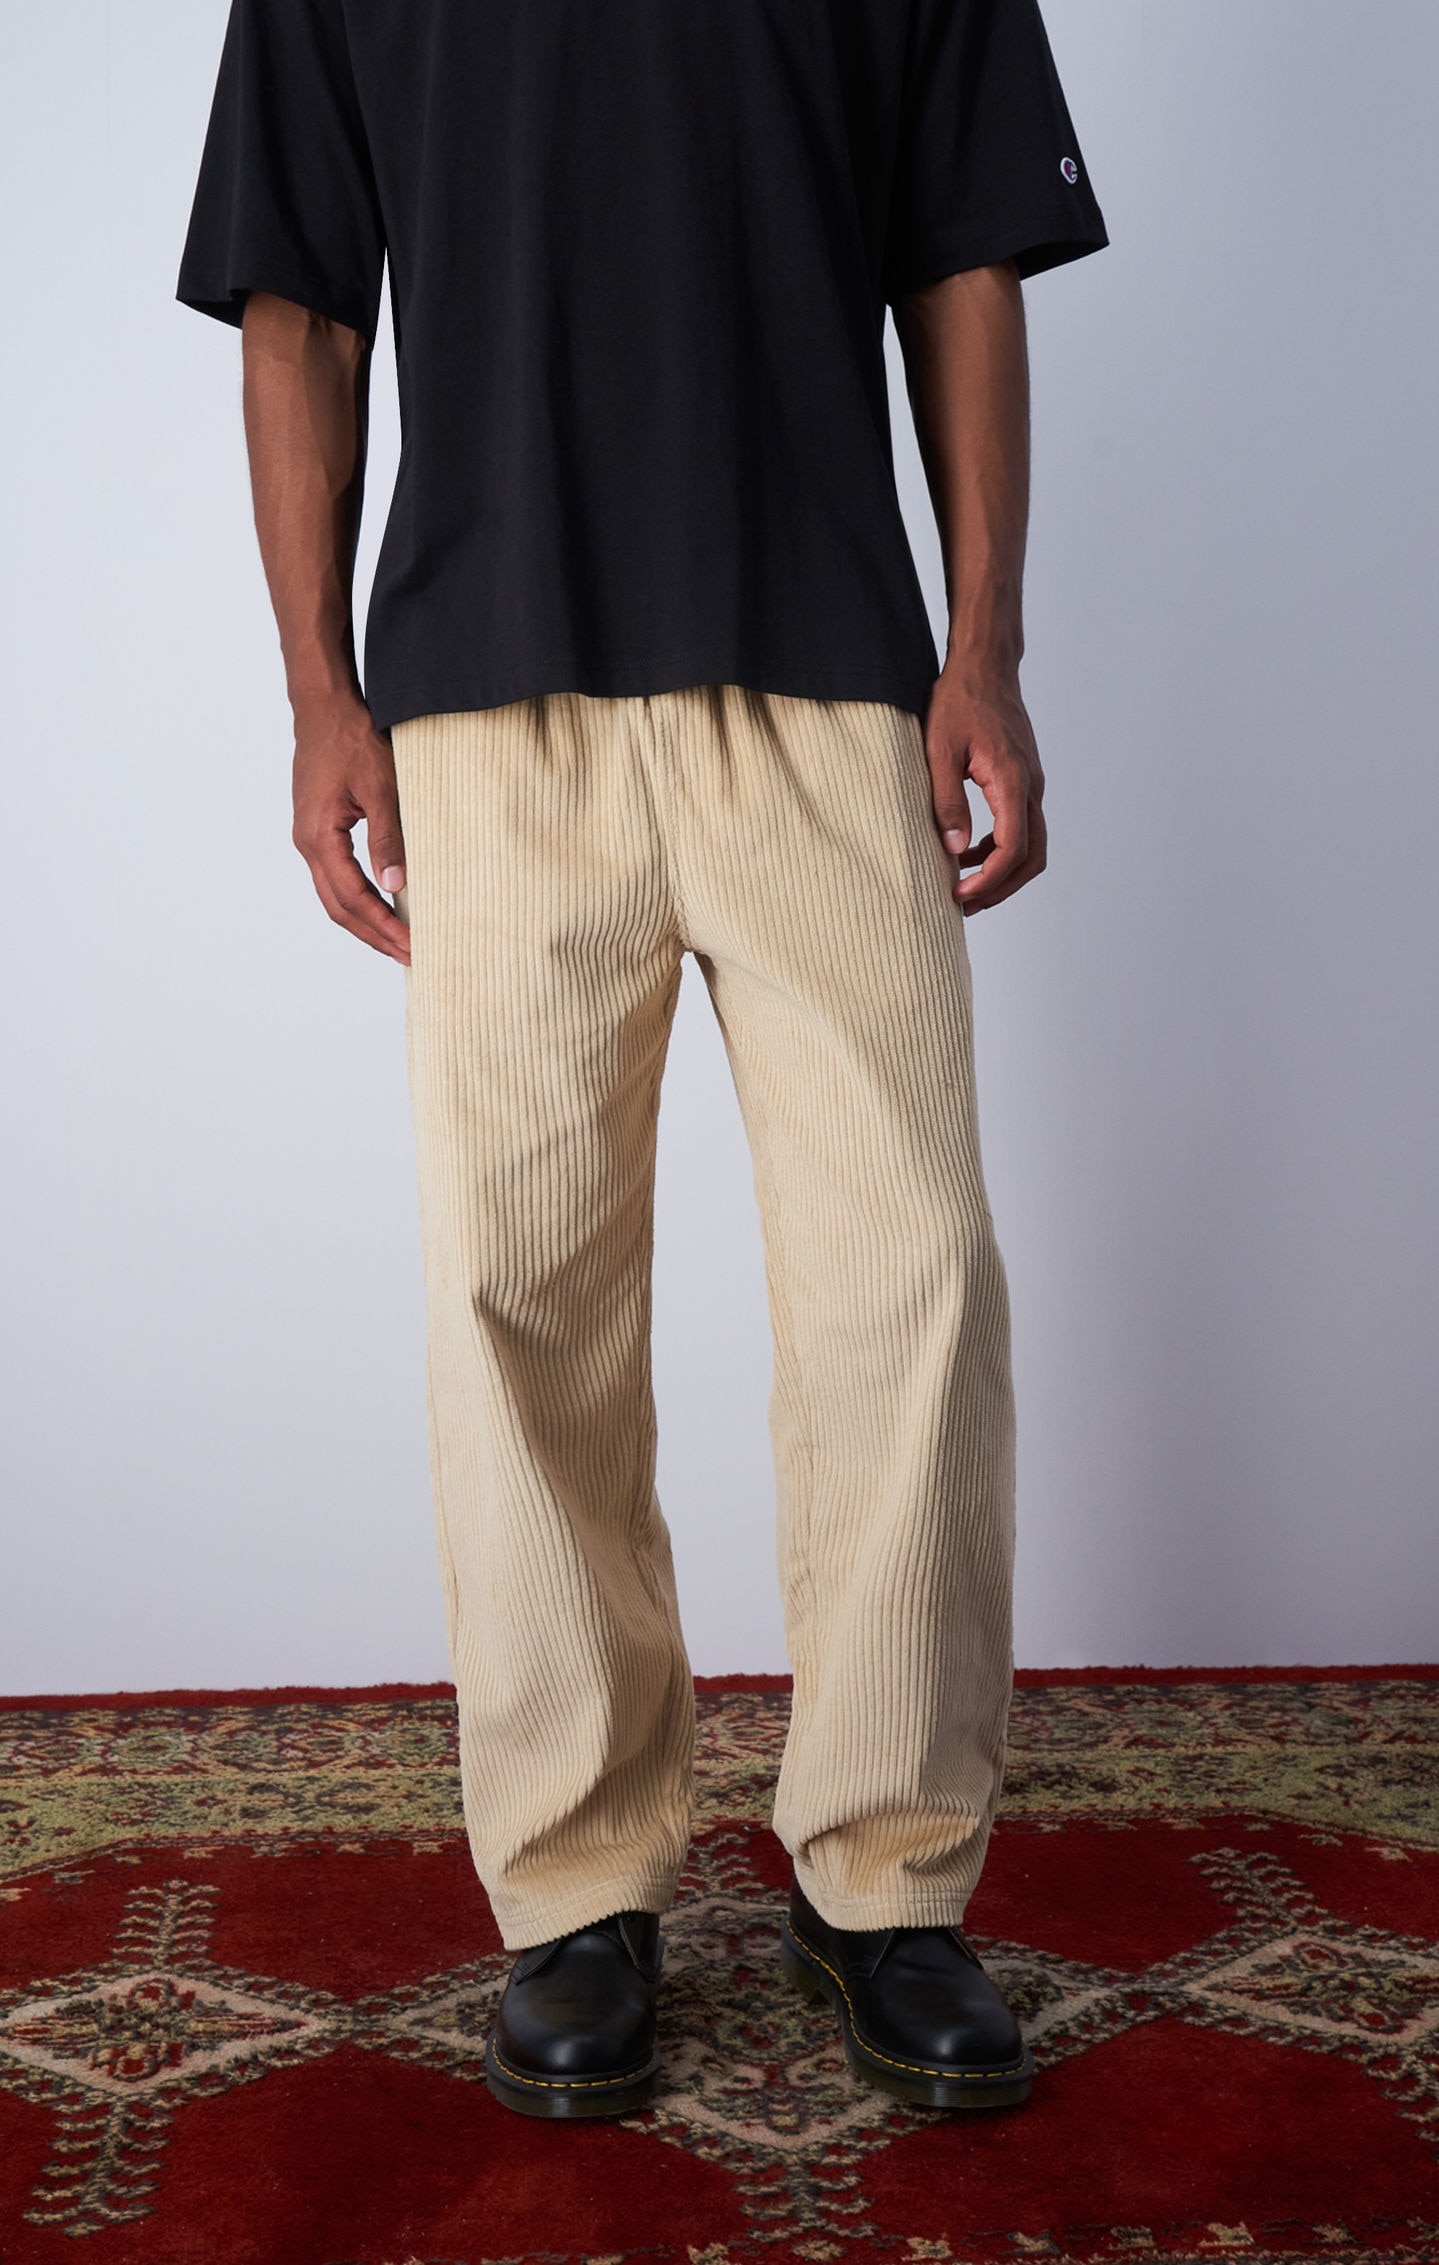 Beige Pantaloni In Velluto Con Coulisse